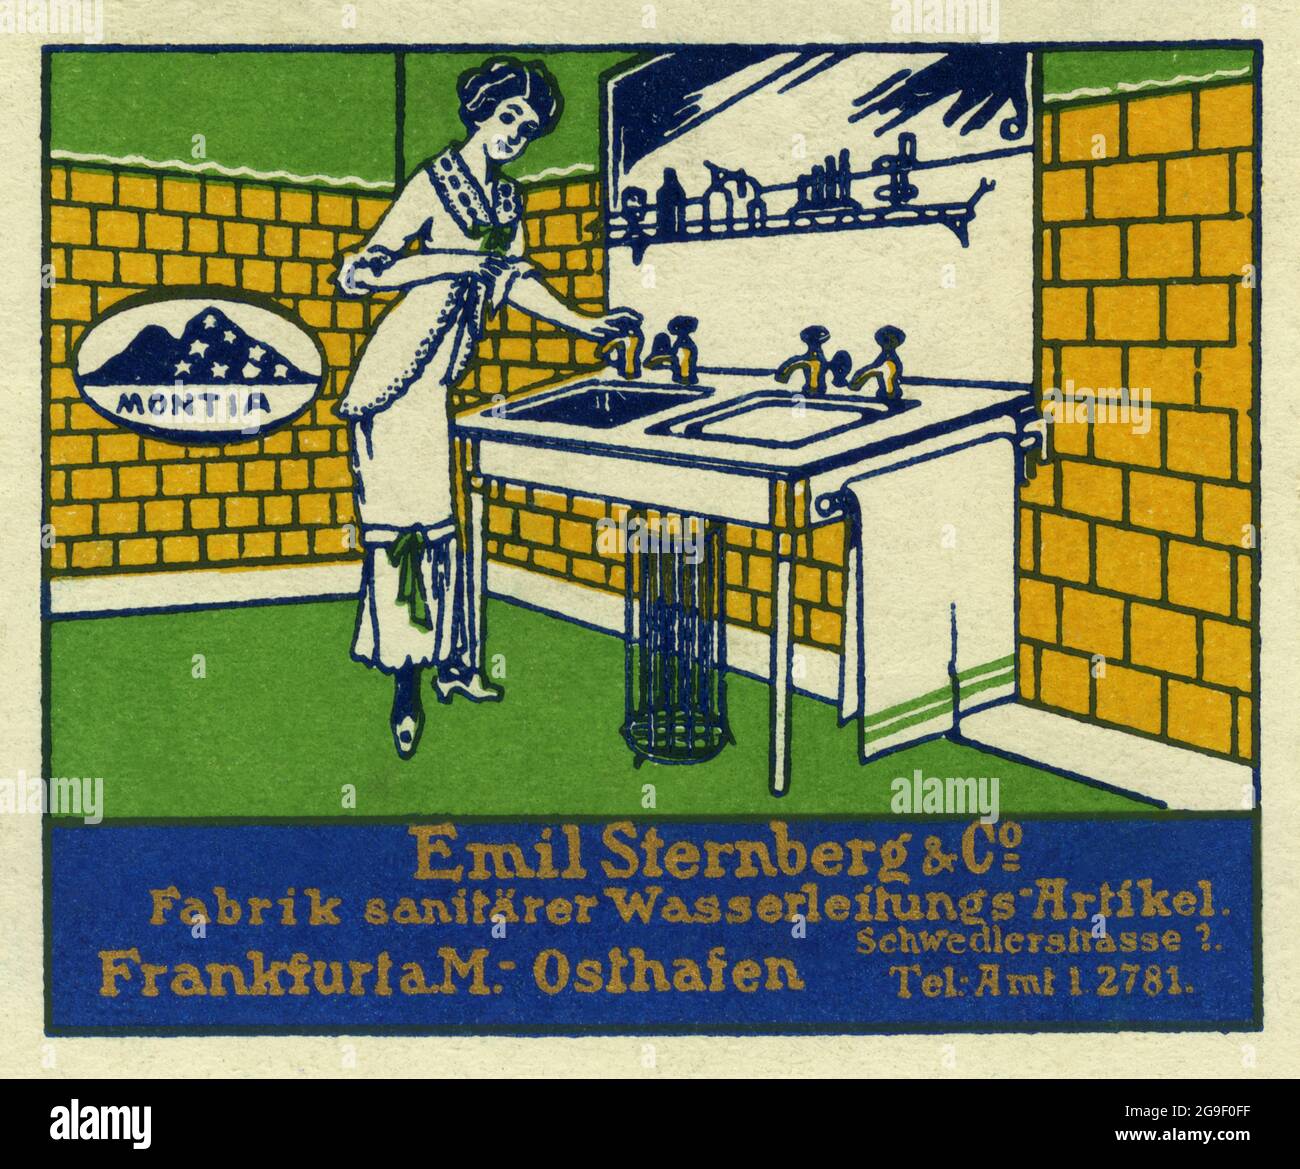 advertising, household, Emil Sternberg & Co, factory of sanitary water pipe features, ADDITIONAL-RIGHTS-CLEARANCE-INFO-NOT-AVAILABLE Stock Photo